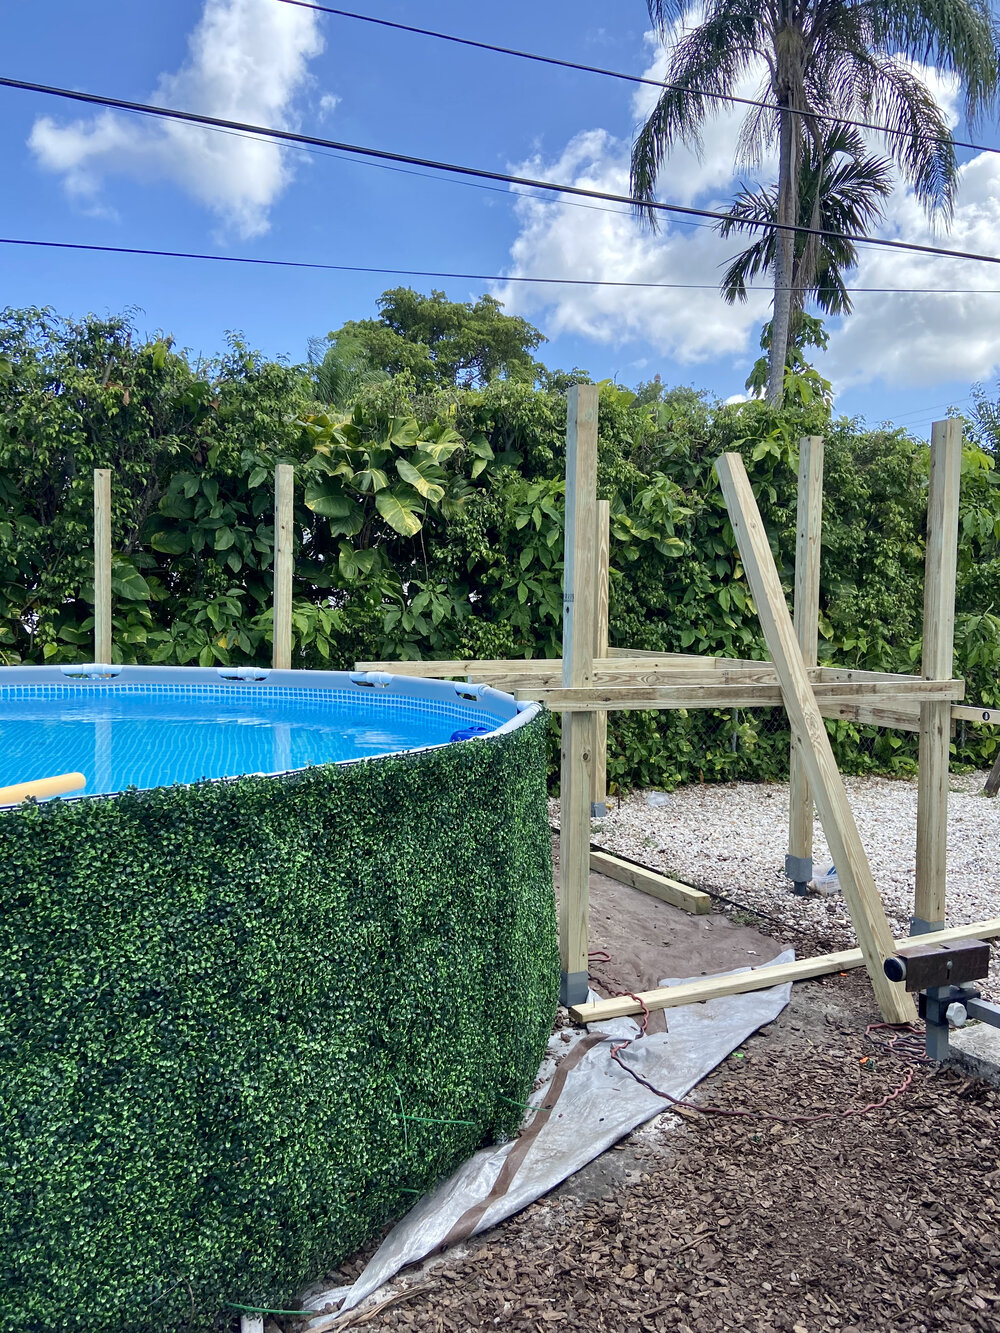 Setting up the frame for our above ground pool semi-deck